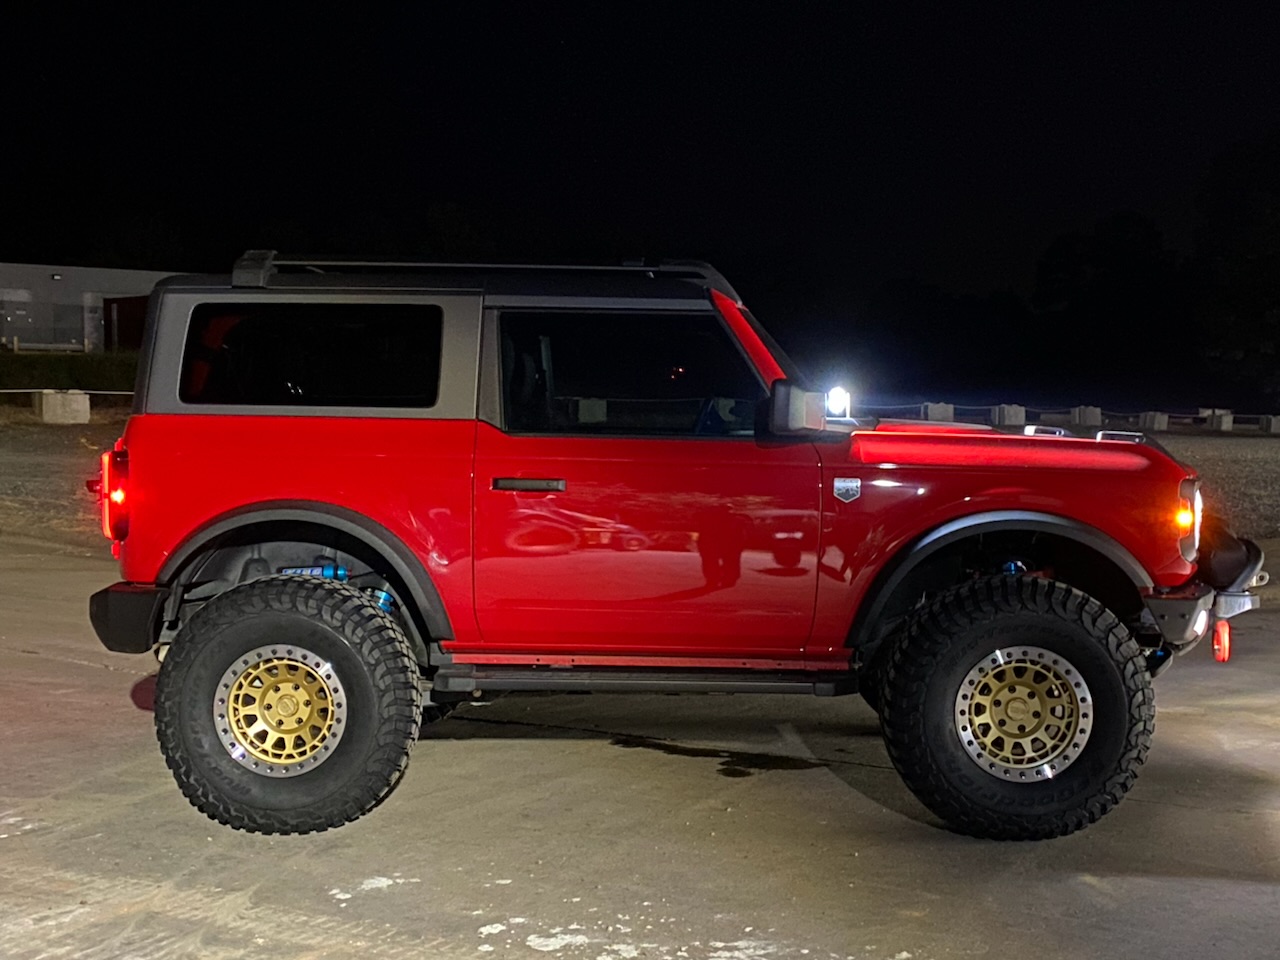 Ford Bronco Show us your installed wheel / tire upgrades here! (Pics) 44C6520A-3ED7-48B9-9FD4-9A3E3630B5FB